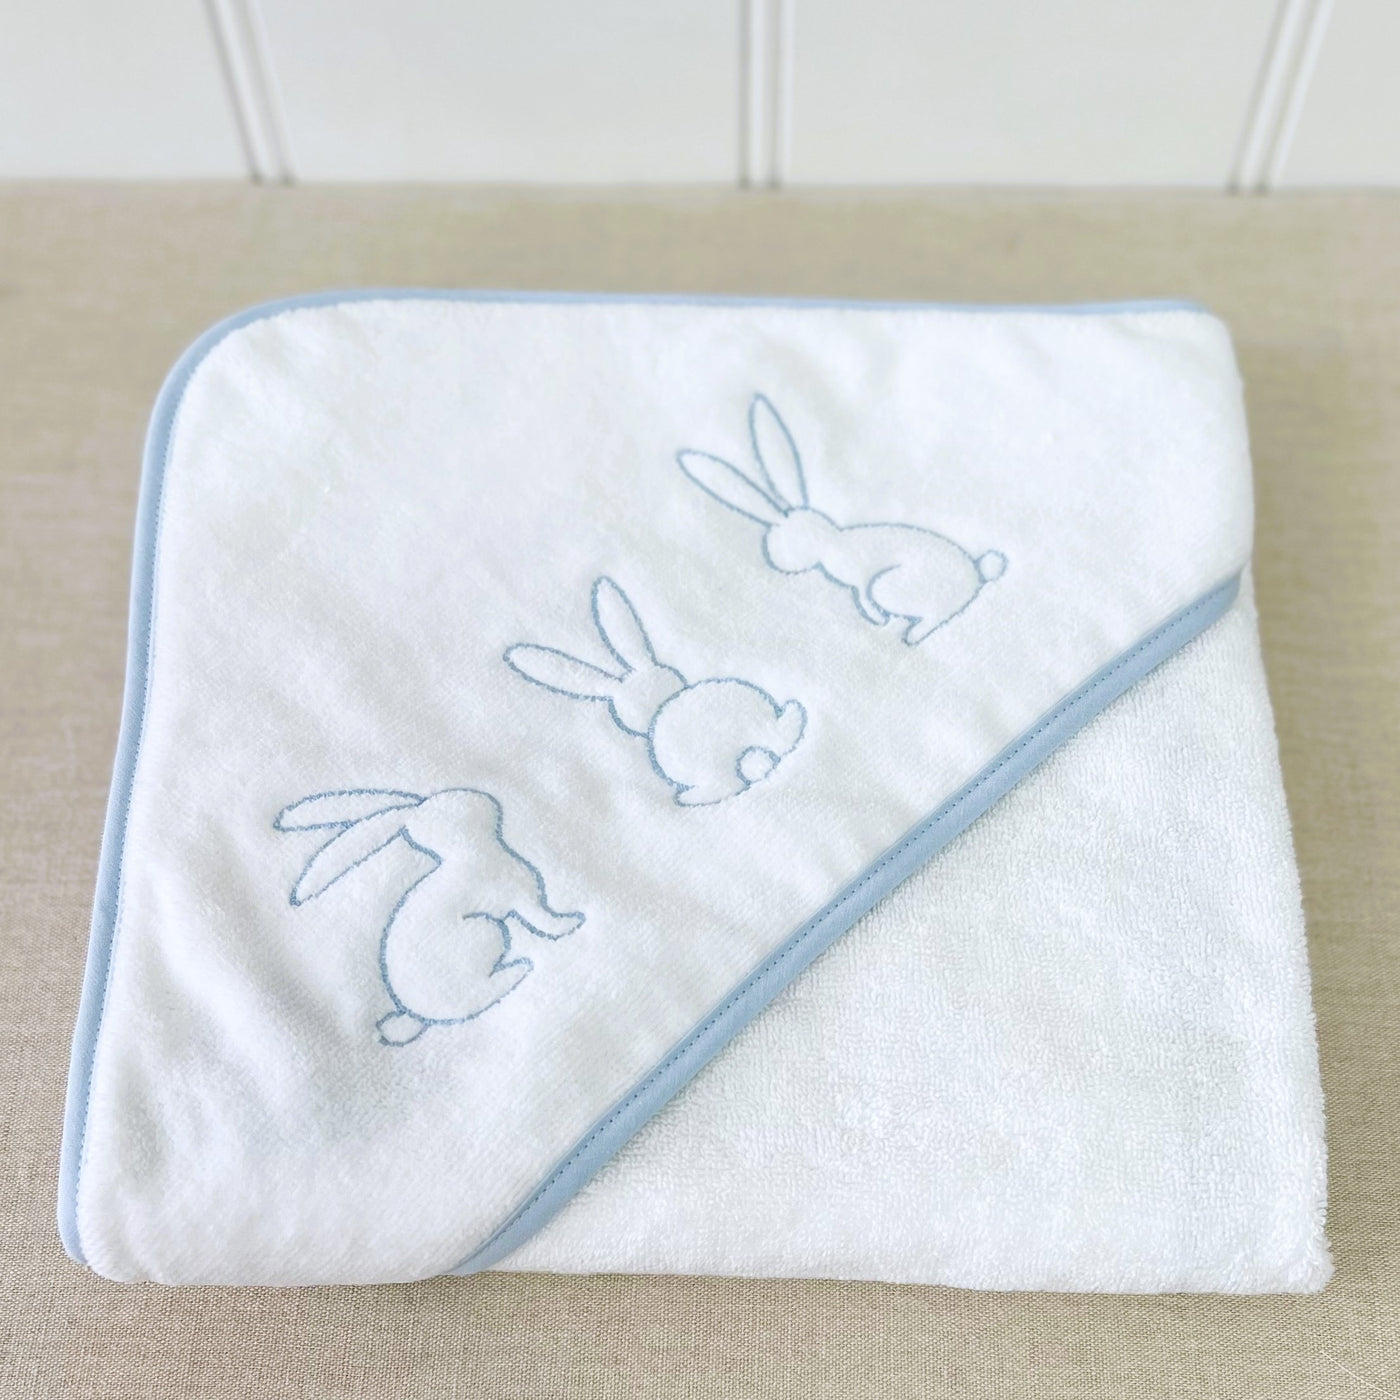 Baby Hooded Towel White Velour With Blue Bunny